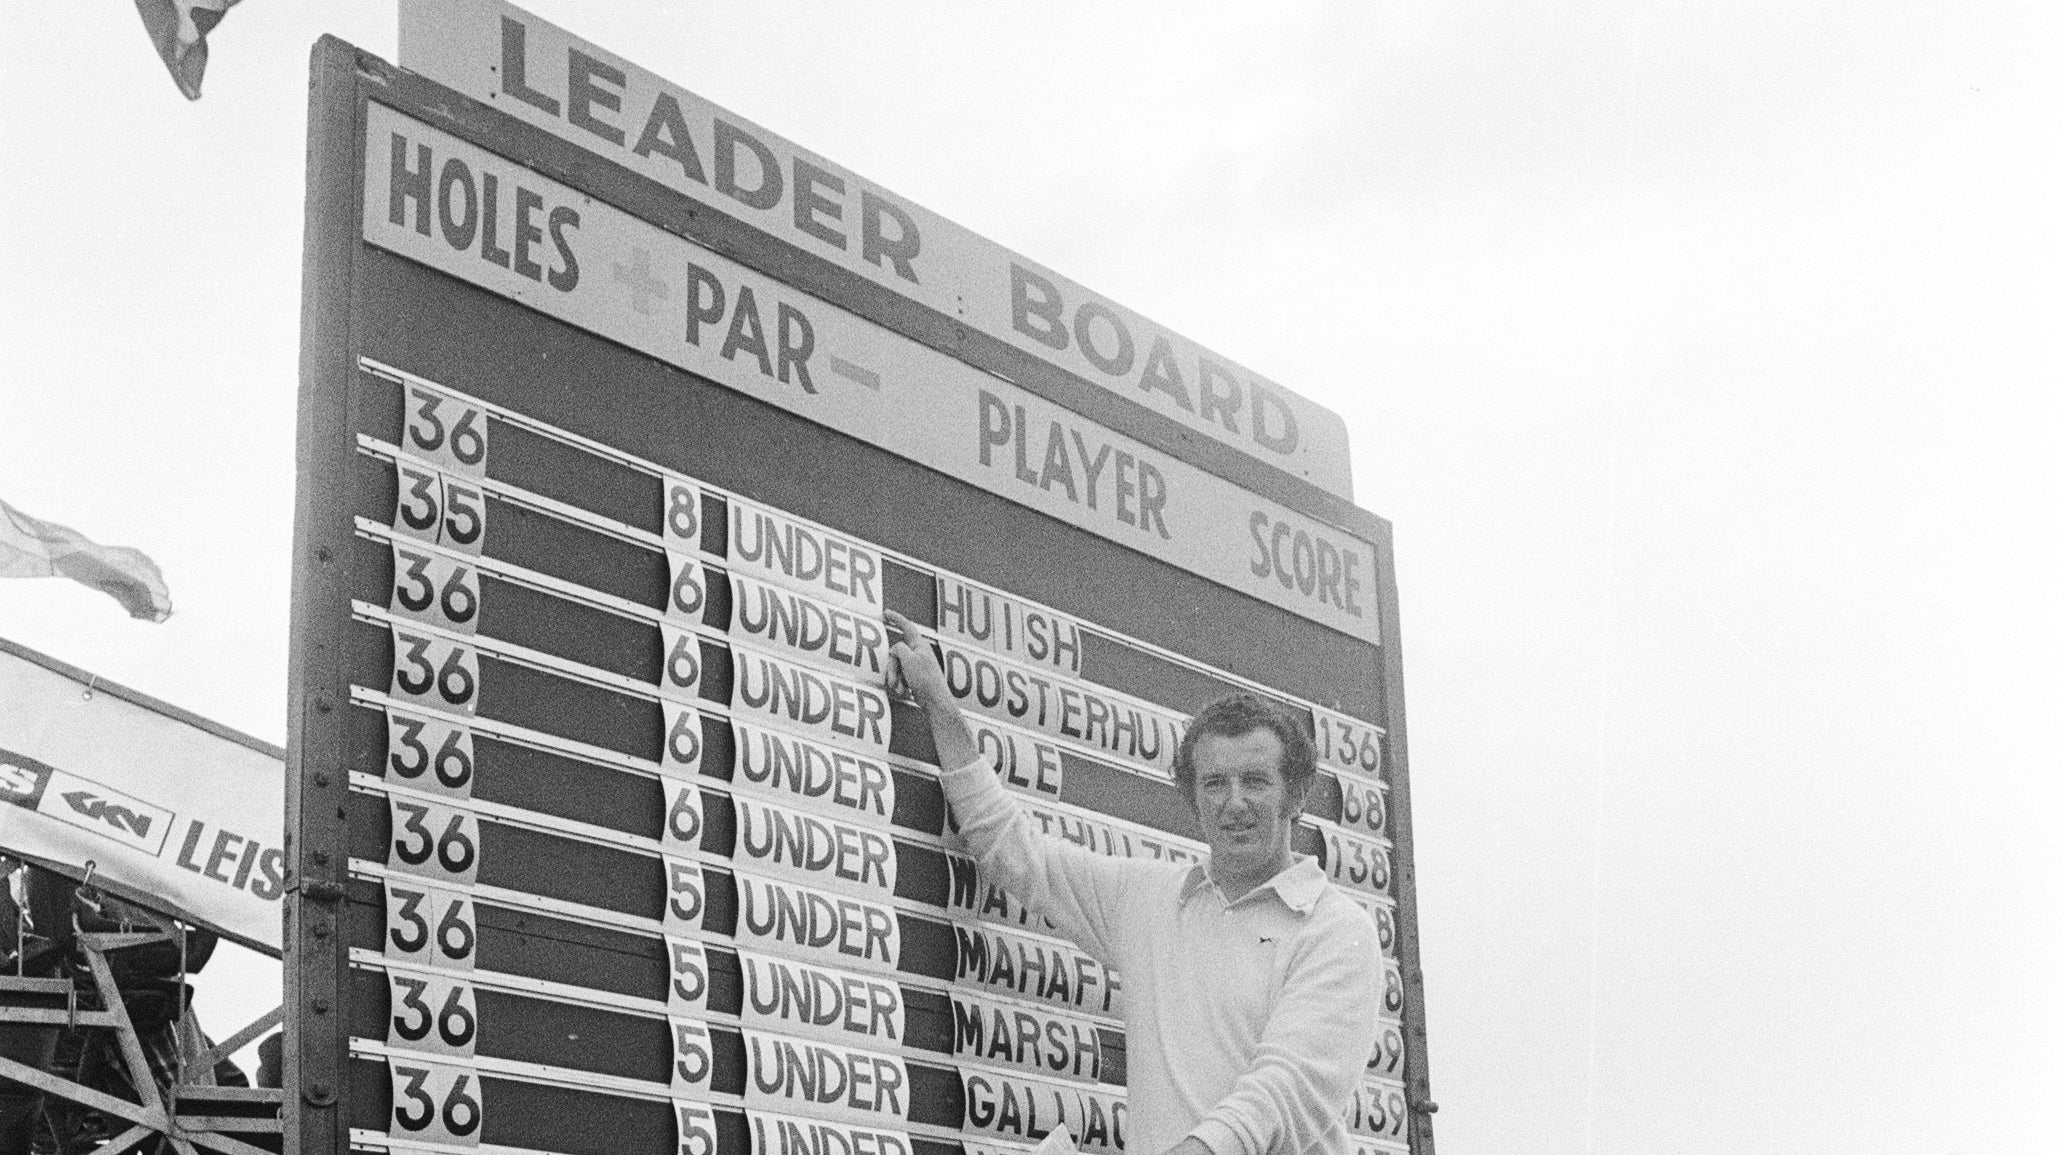 David Huish pointing at a leaderboard with his name on top